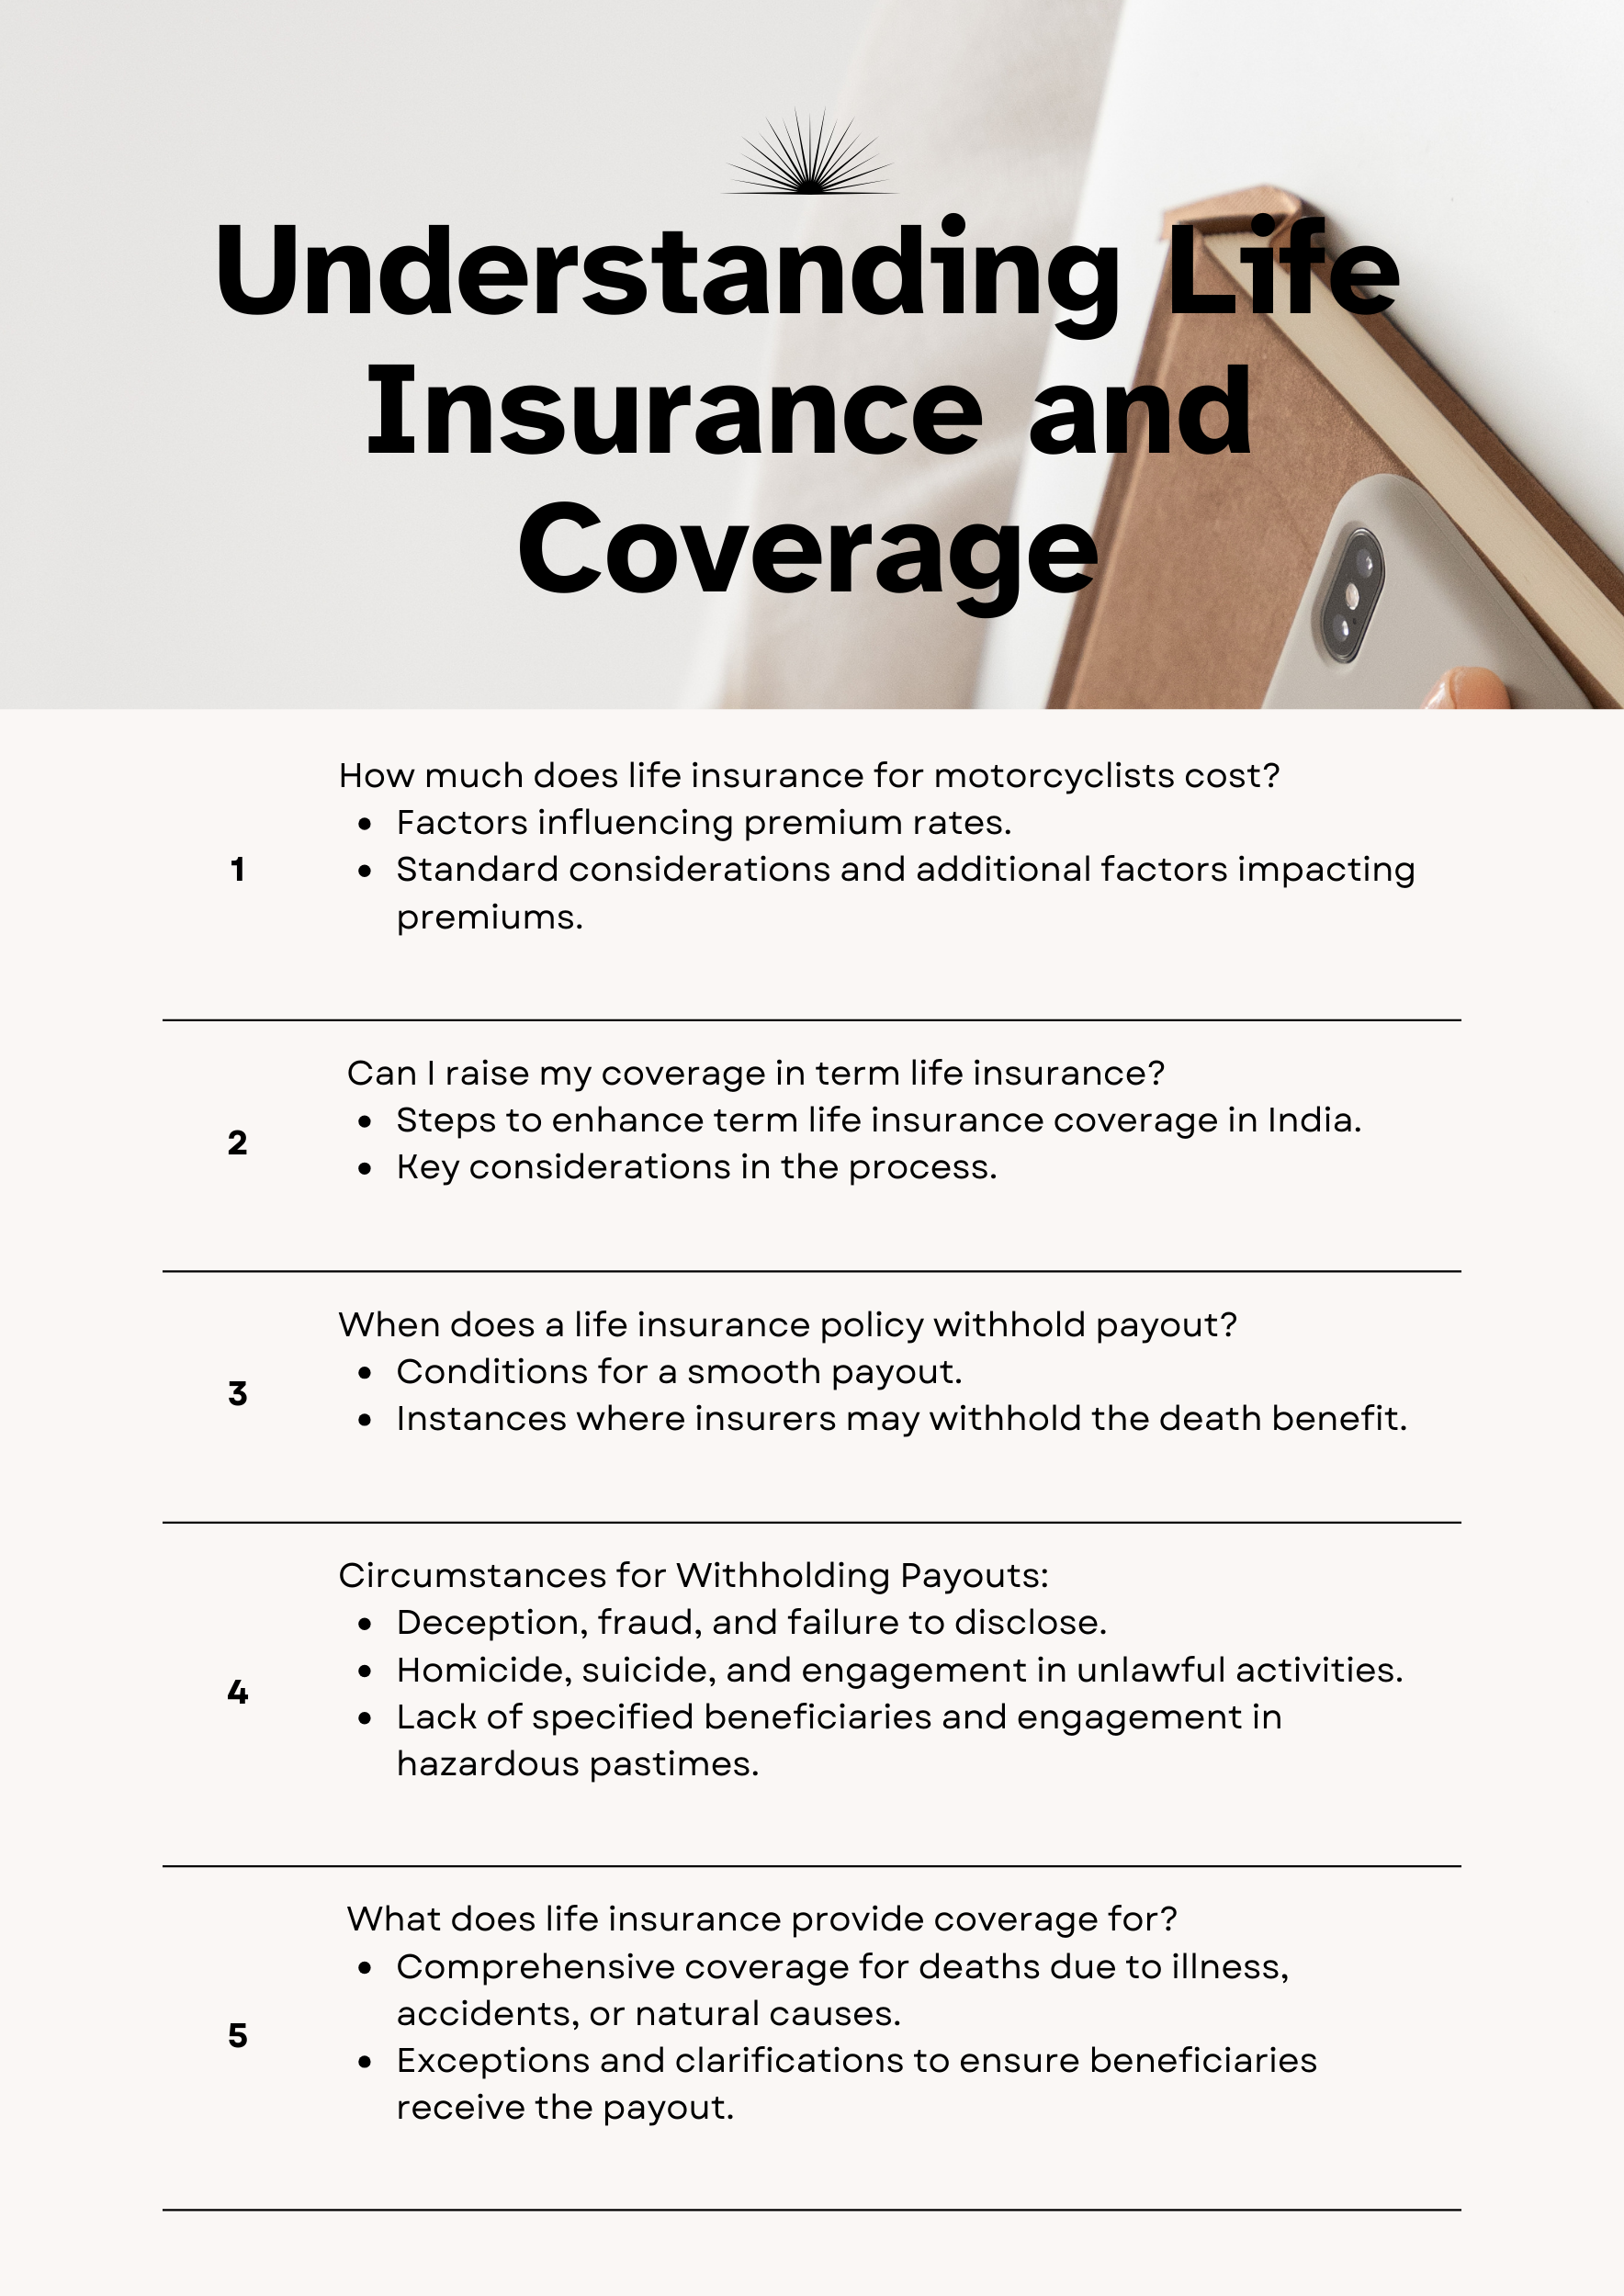 an infographic of>"Understanding Life Insurance and Coverage" 